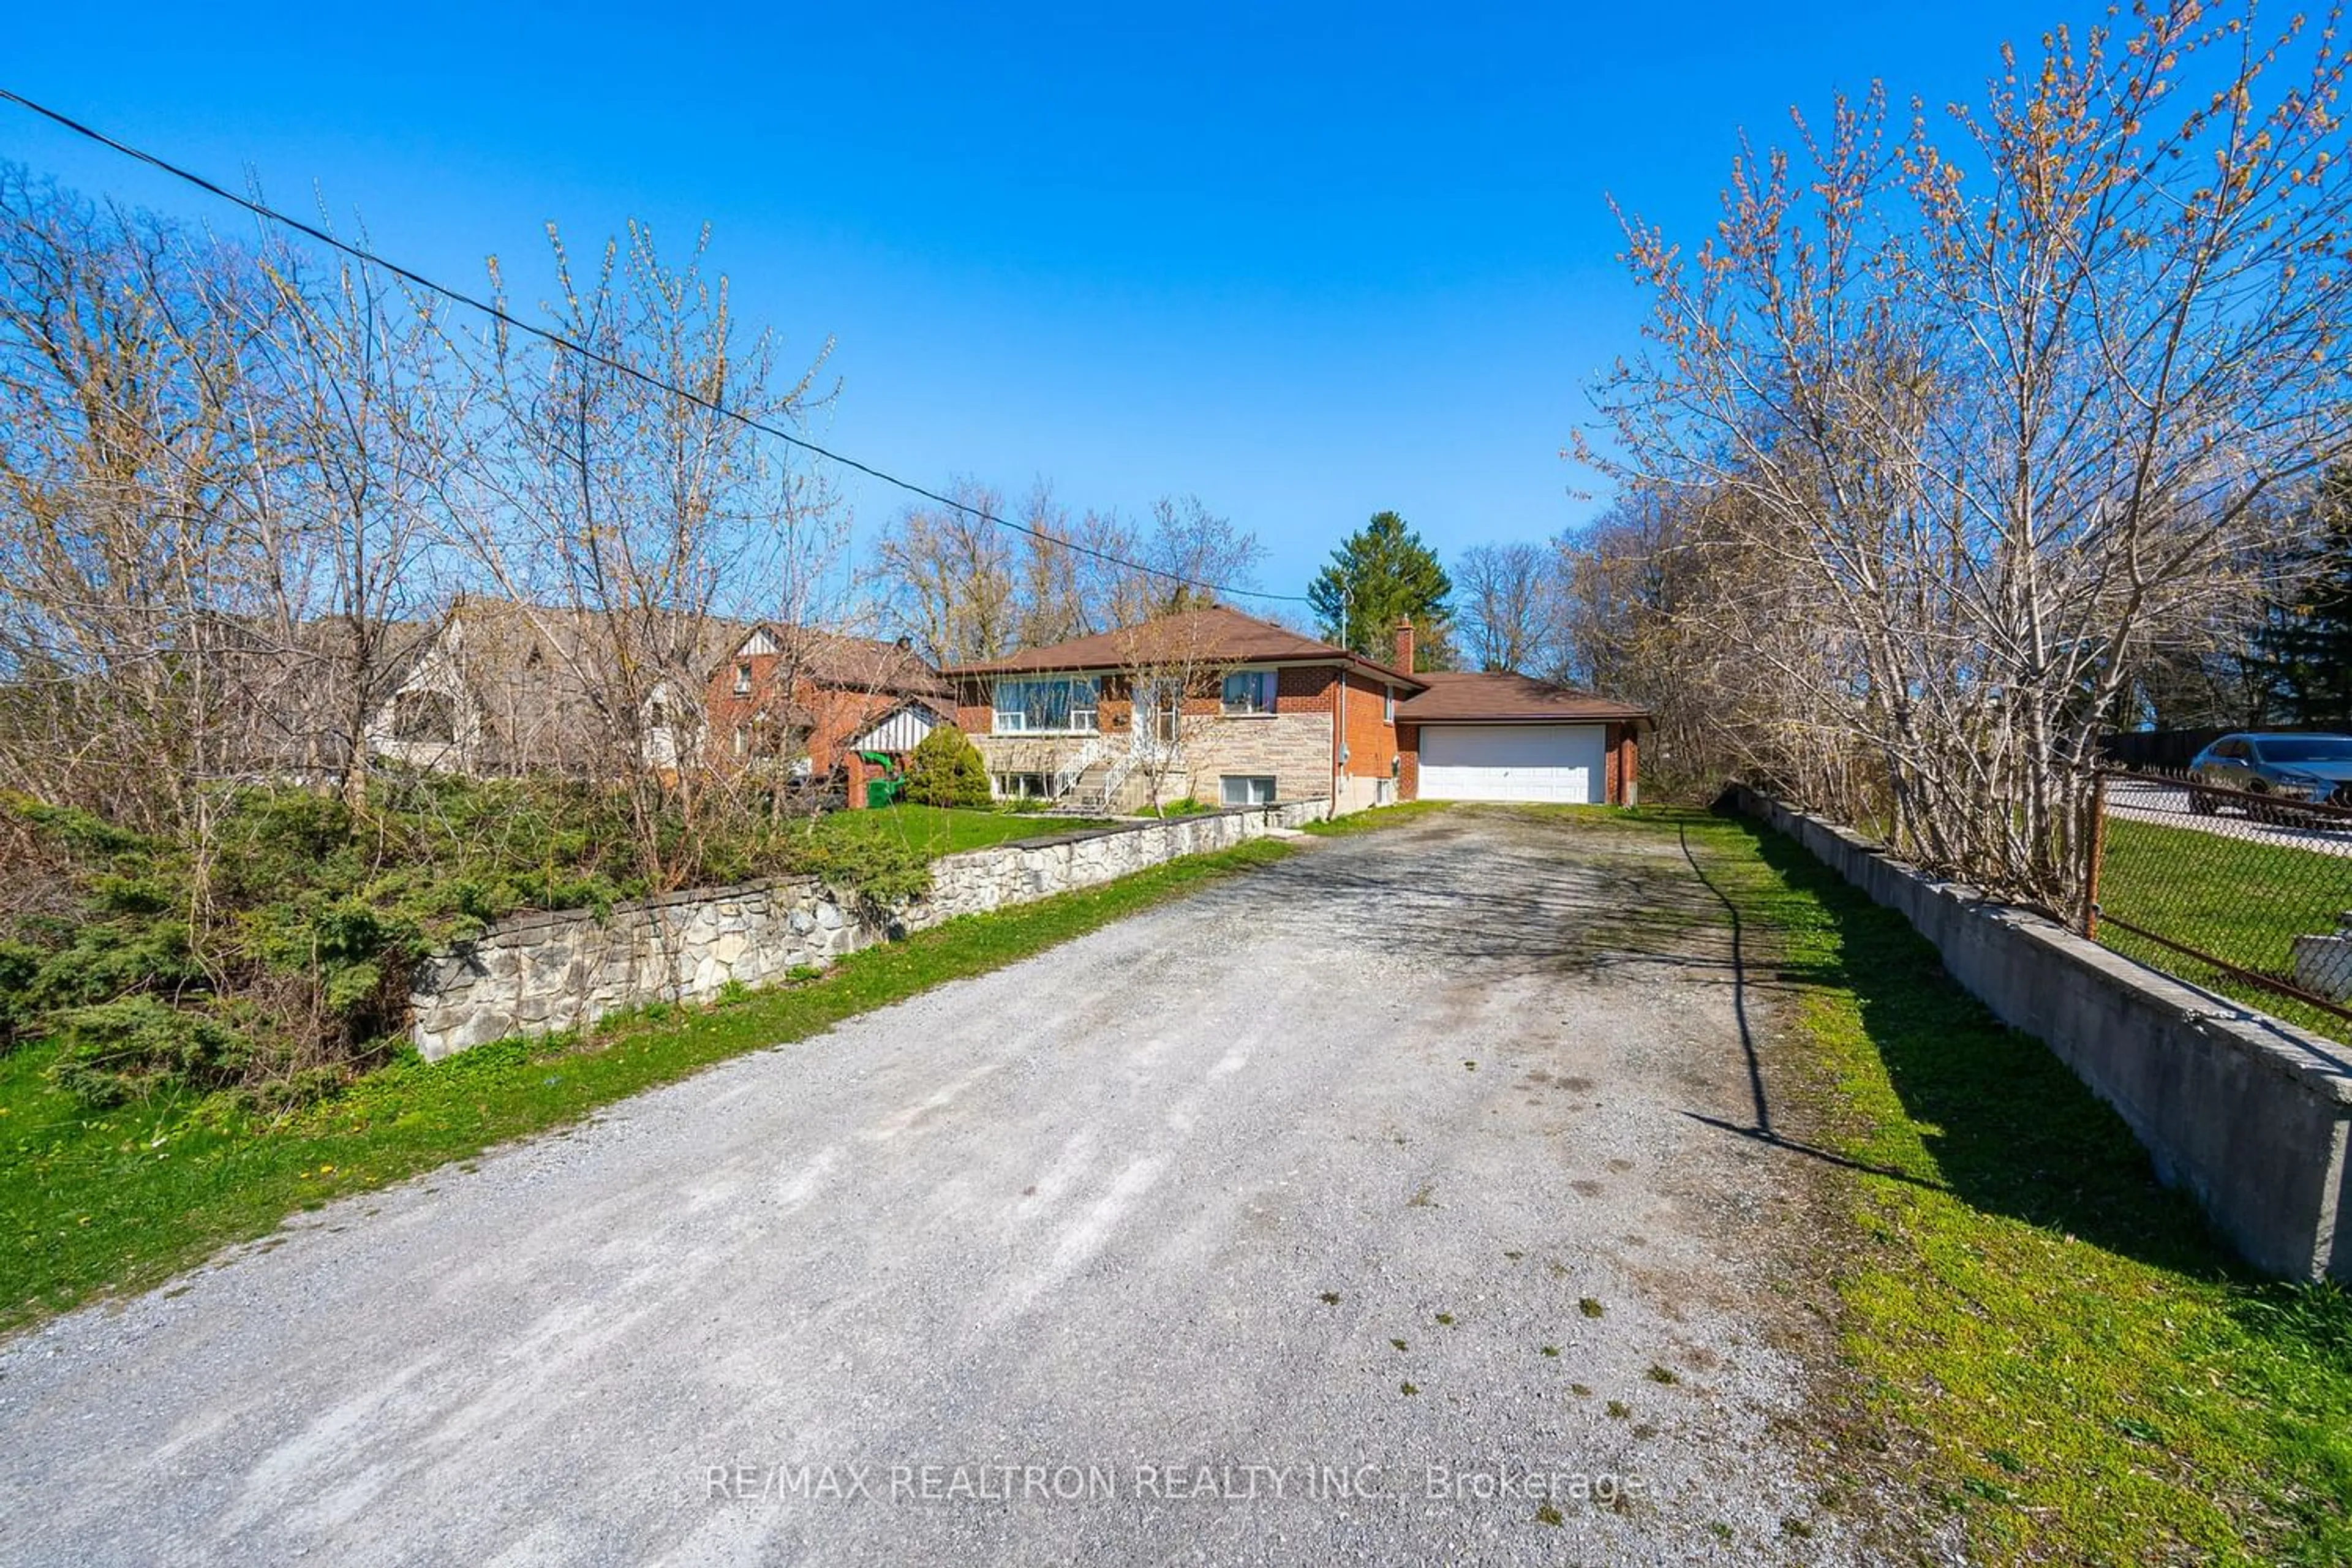 Frontside or backside of a home for 108 Garden Ave, Richmond Hill Ontario L4C 6M1